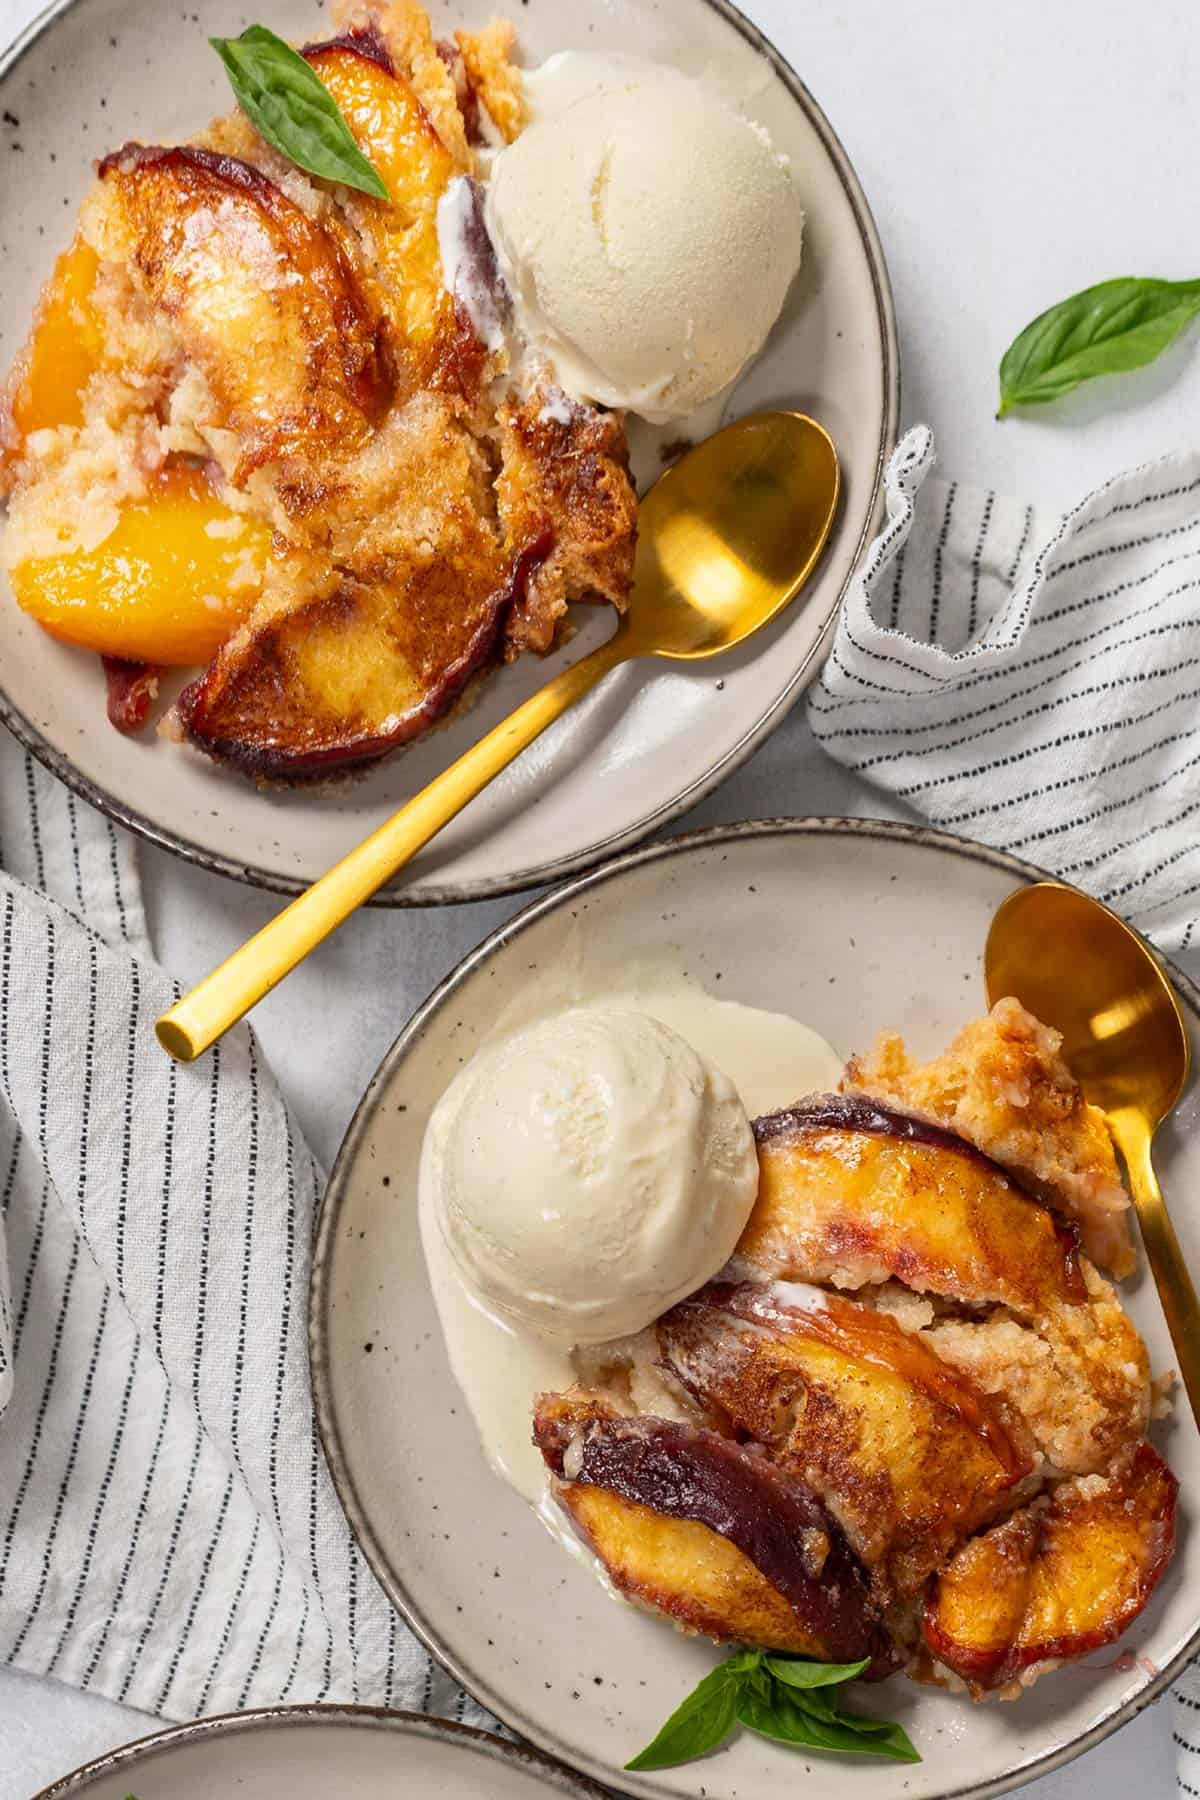 Peach cobbler served in two individual plates.